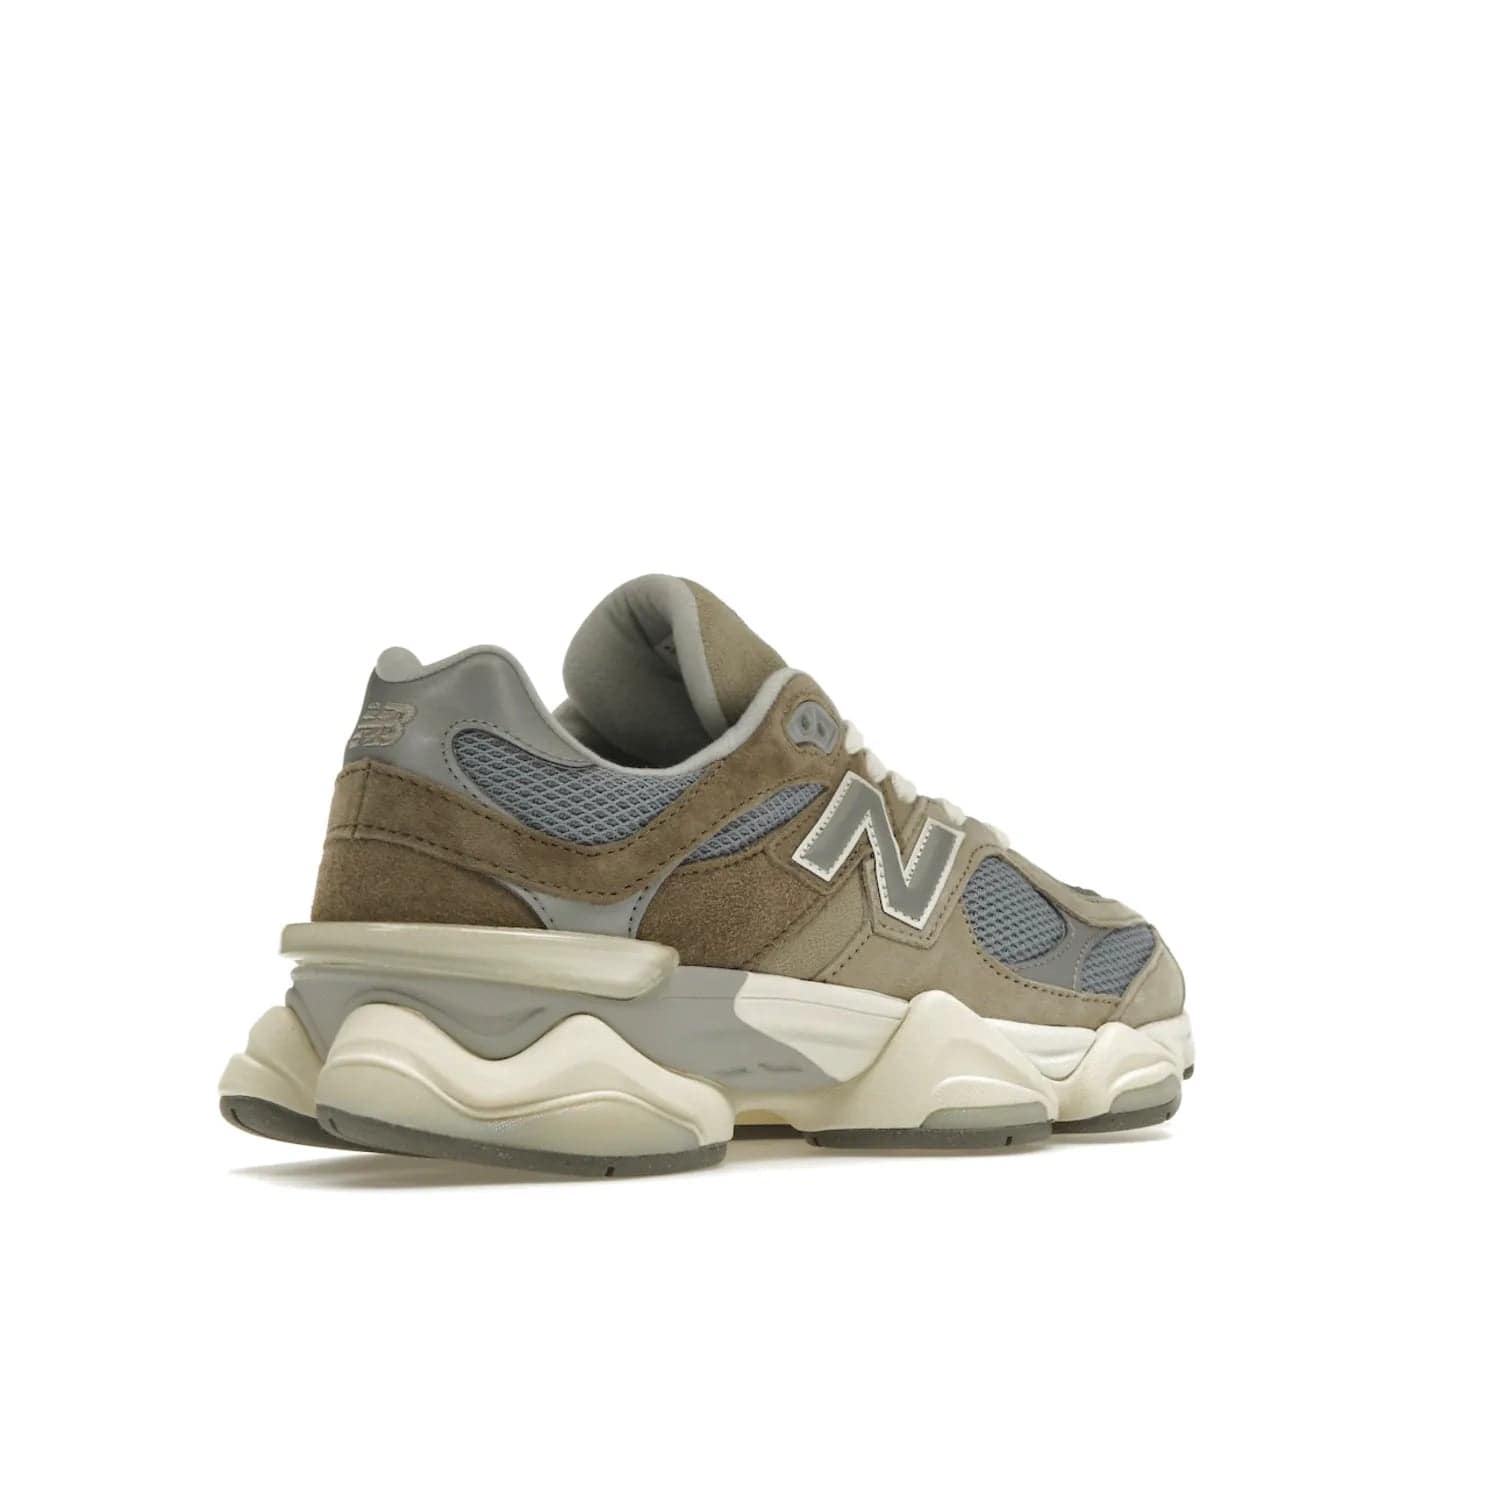 New Balance 9060 Mushroom - Image 33 - Only at www.BallersClubKickz.com - Get the New Balance 9060 Mushroom in stylish aluminum and mushroom tones. Featuring a porous mesh fabric with multiple suede overlays, a grey N symbol and rugged off-white/grey sole. Shop now and make a statement.